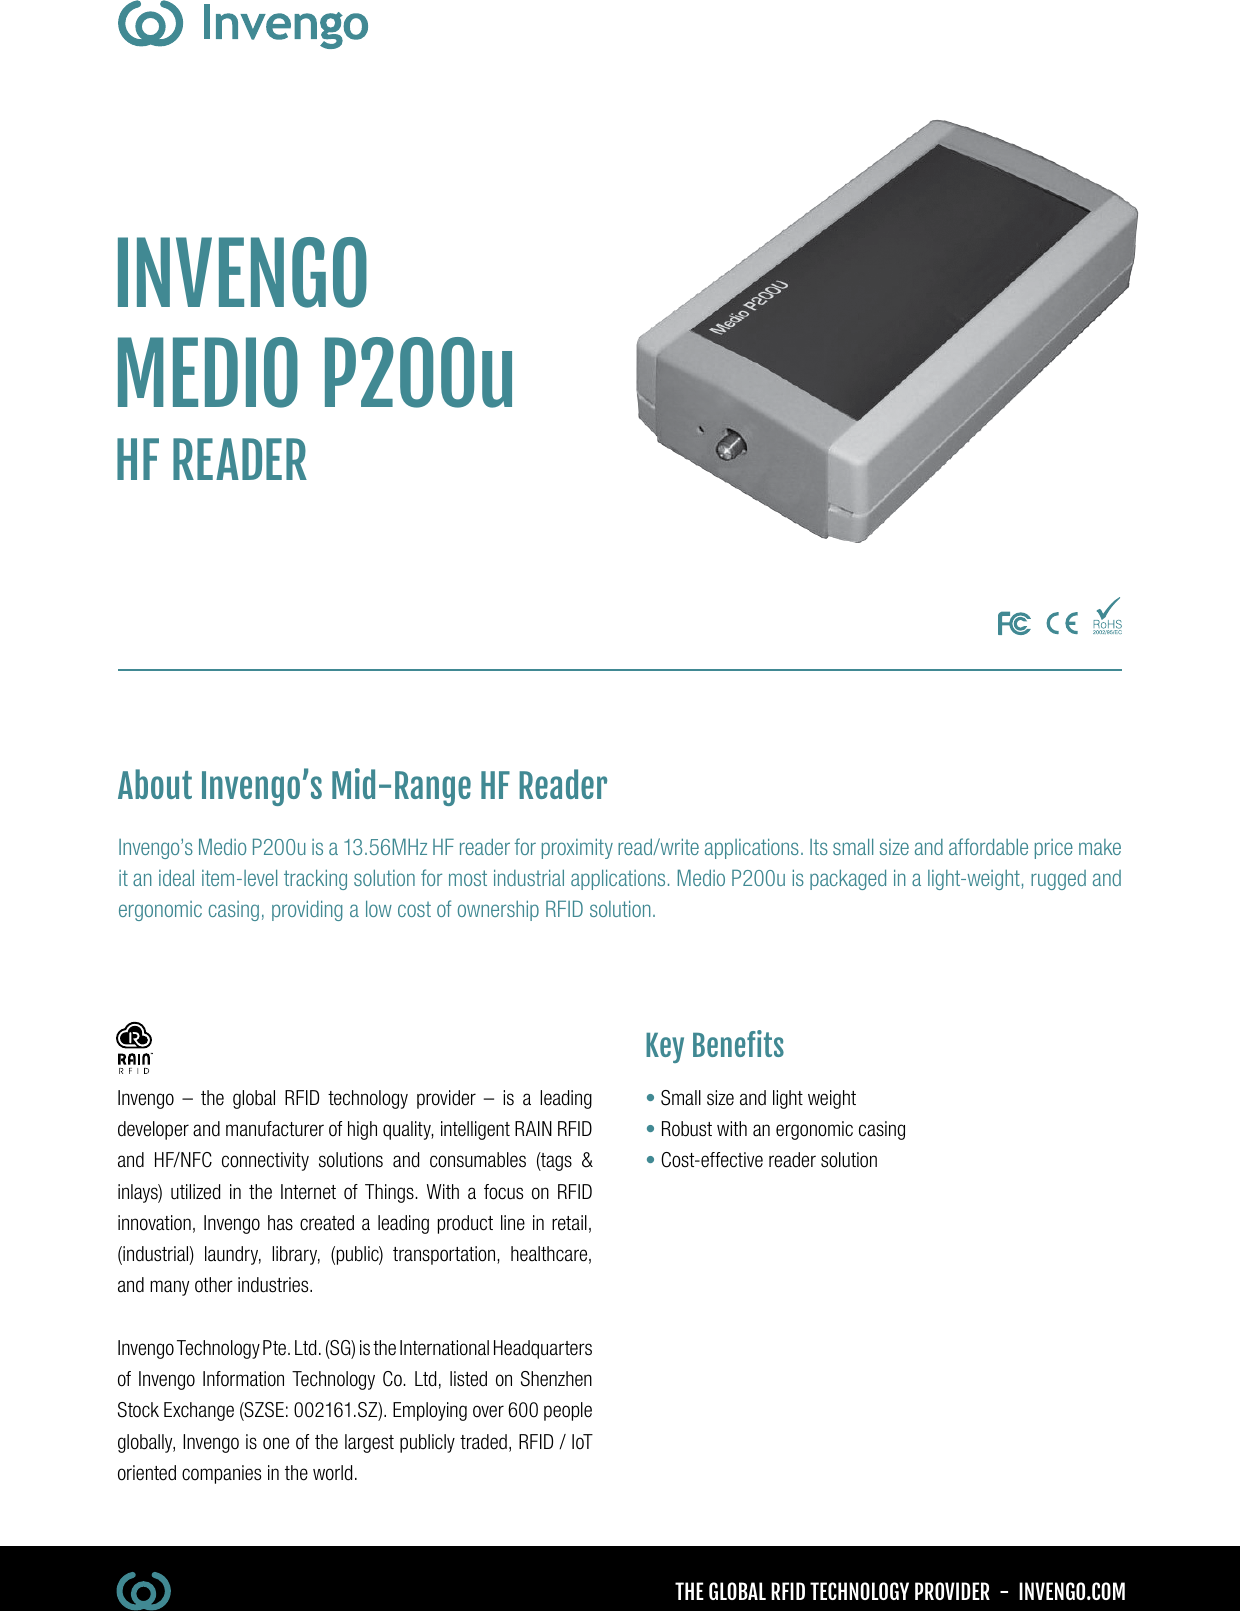 THE GLOBAL RFID TECHNOLOGY PROVIDER  -  INVENGO.COMInvengo – the global RFID technology provider – is a leading developer and manufacturer of high quality, intelligent RAIN RFID and HF/NFC connectivity solutions and consumables (tags &amp; inlays) utilized in the Internet of Things. With a focus on RFID innovation, Invengo has created a leading product line in retail, (industrial) laundry, library, (public) transportation, healthcare, and many other industries.Invengo Technology Pte. Ltd. (SG) is the International Headquarters of Invengo Information Technology Co. Ltd, listed on Shenzhen Stock Exchange (SZSE: 002161.SZ). Employing over 600 people globally, Invengo is one of the largest publicly traded, RFID / IoT oriented companies in the world.INVENGOMEDIO P200uHF READERInvengo’s Medio P200u is a 13.56MHz HF reader for proximity read/write applications. Its small size and affordable price make it an ideal item-level tracking solution for most industrial applications. Medio P200u is packaged in a light-weight, rugged and ergonomic casing, providing a low cost of ownership RFID solution.•  Small size and light weight•  Robust with an ergonomic casing•  Cost-effective reader solutionKey BenetsAbout Invengo’s Mid-Range HF Reader